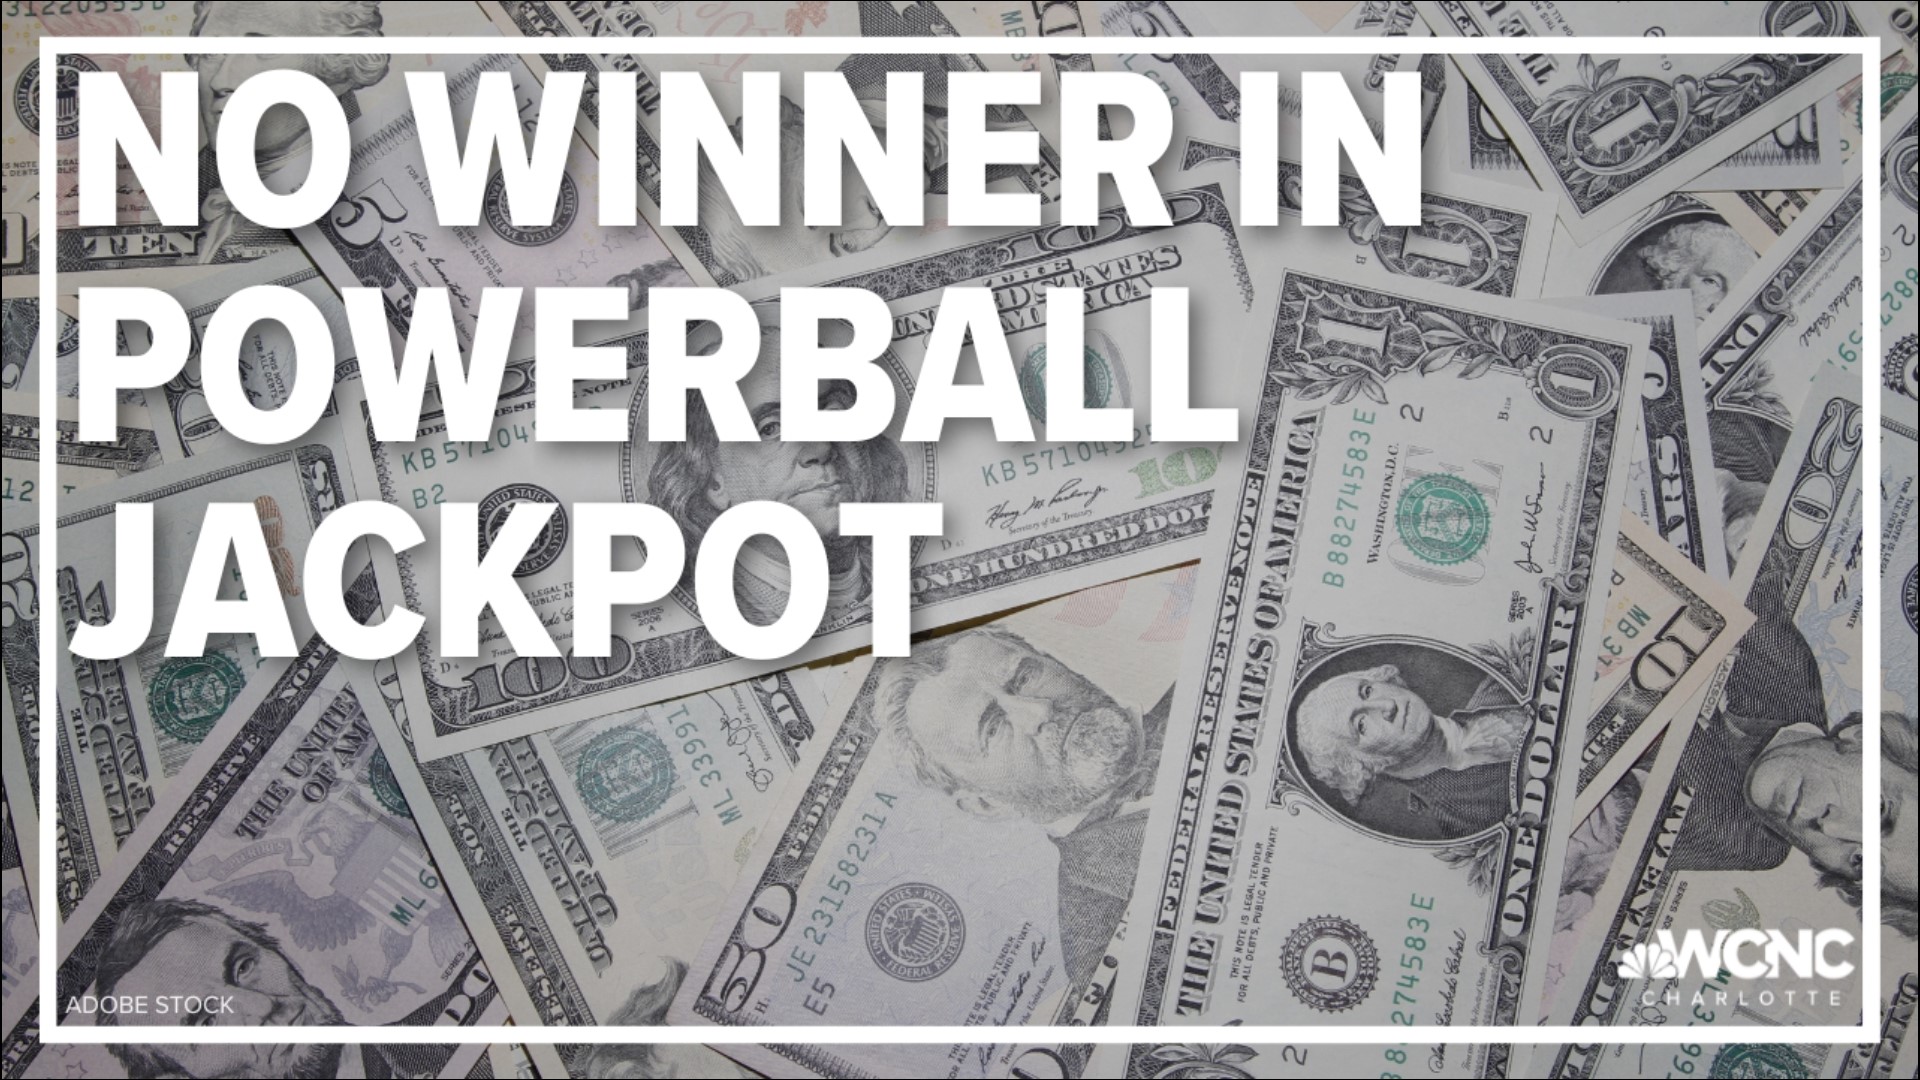 A Powerball ticket worth $1 million was sold in Iredell County, North Carolina Education Lottery officials announced Thursday.